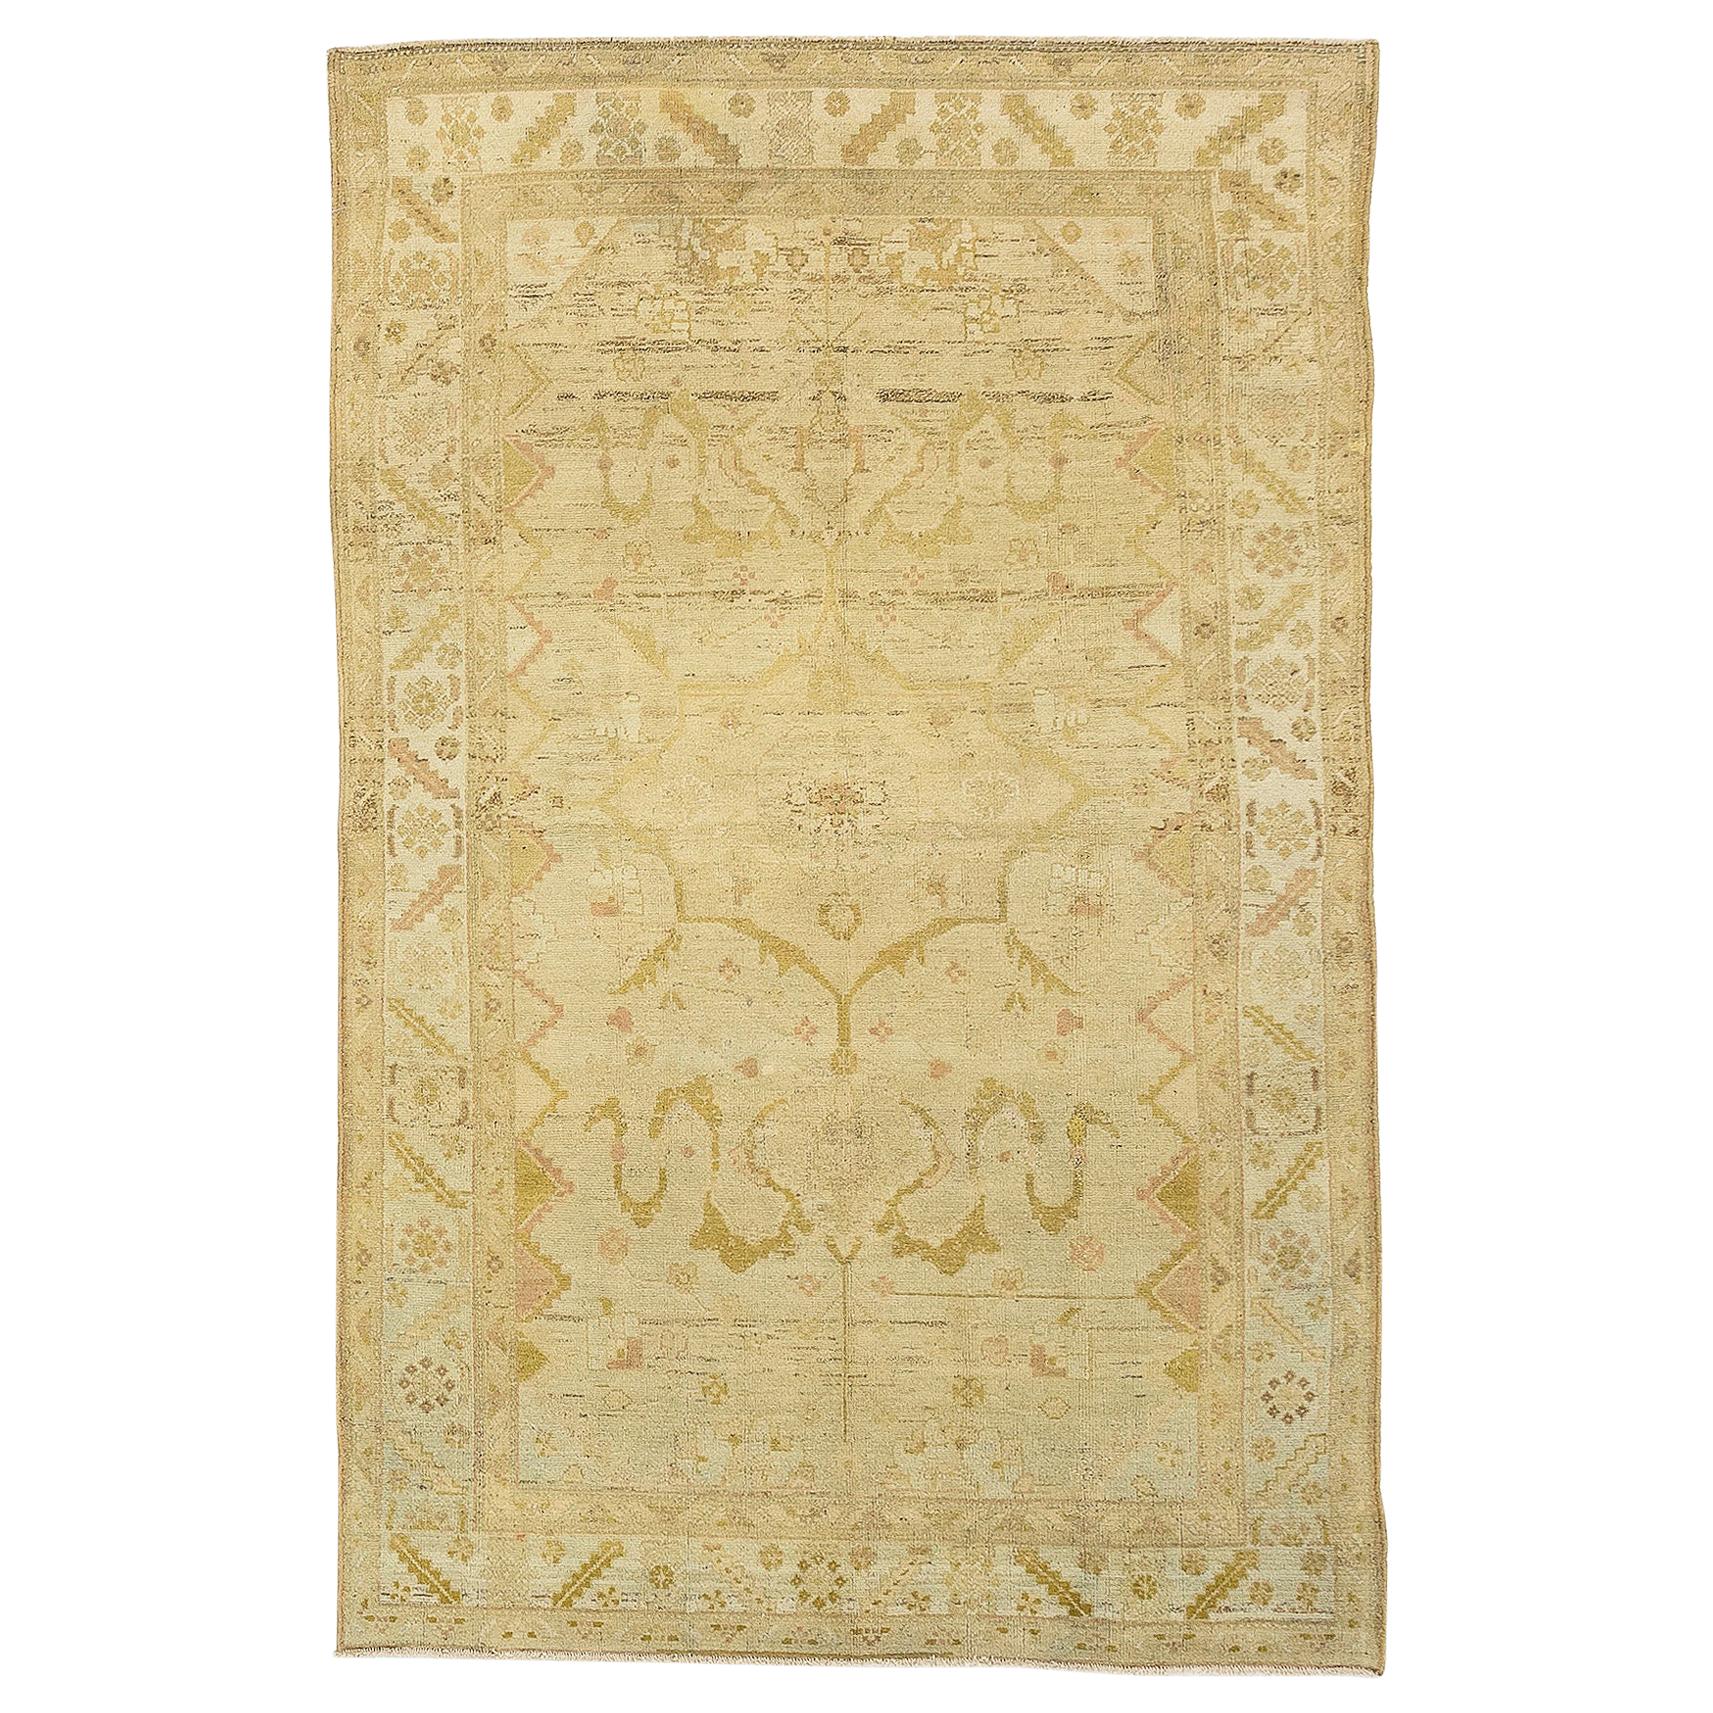 Antique Persian Malayer Rug with Botanical Details in Brown on Ivory Field